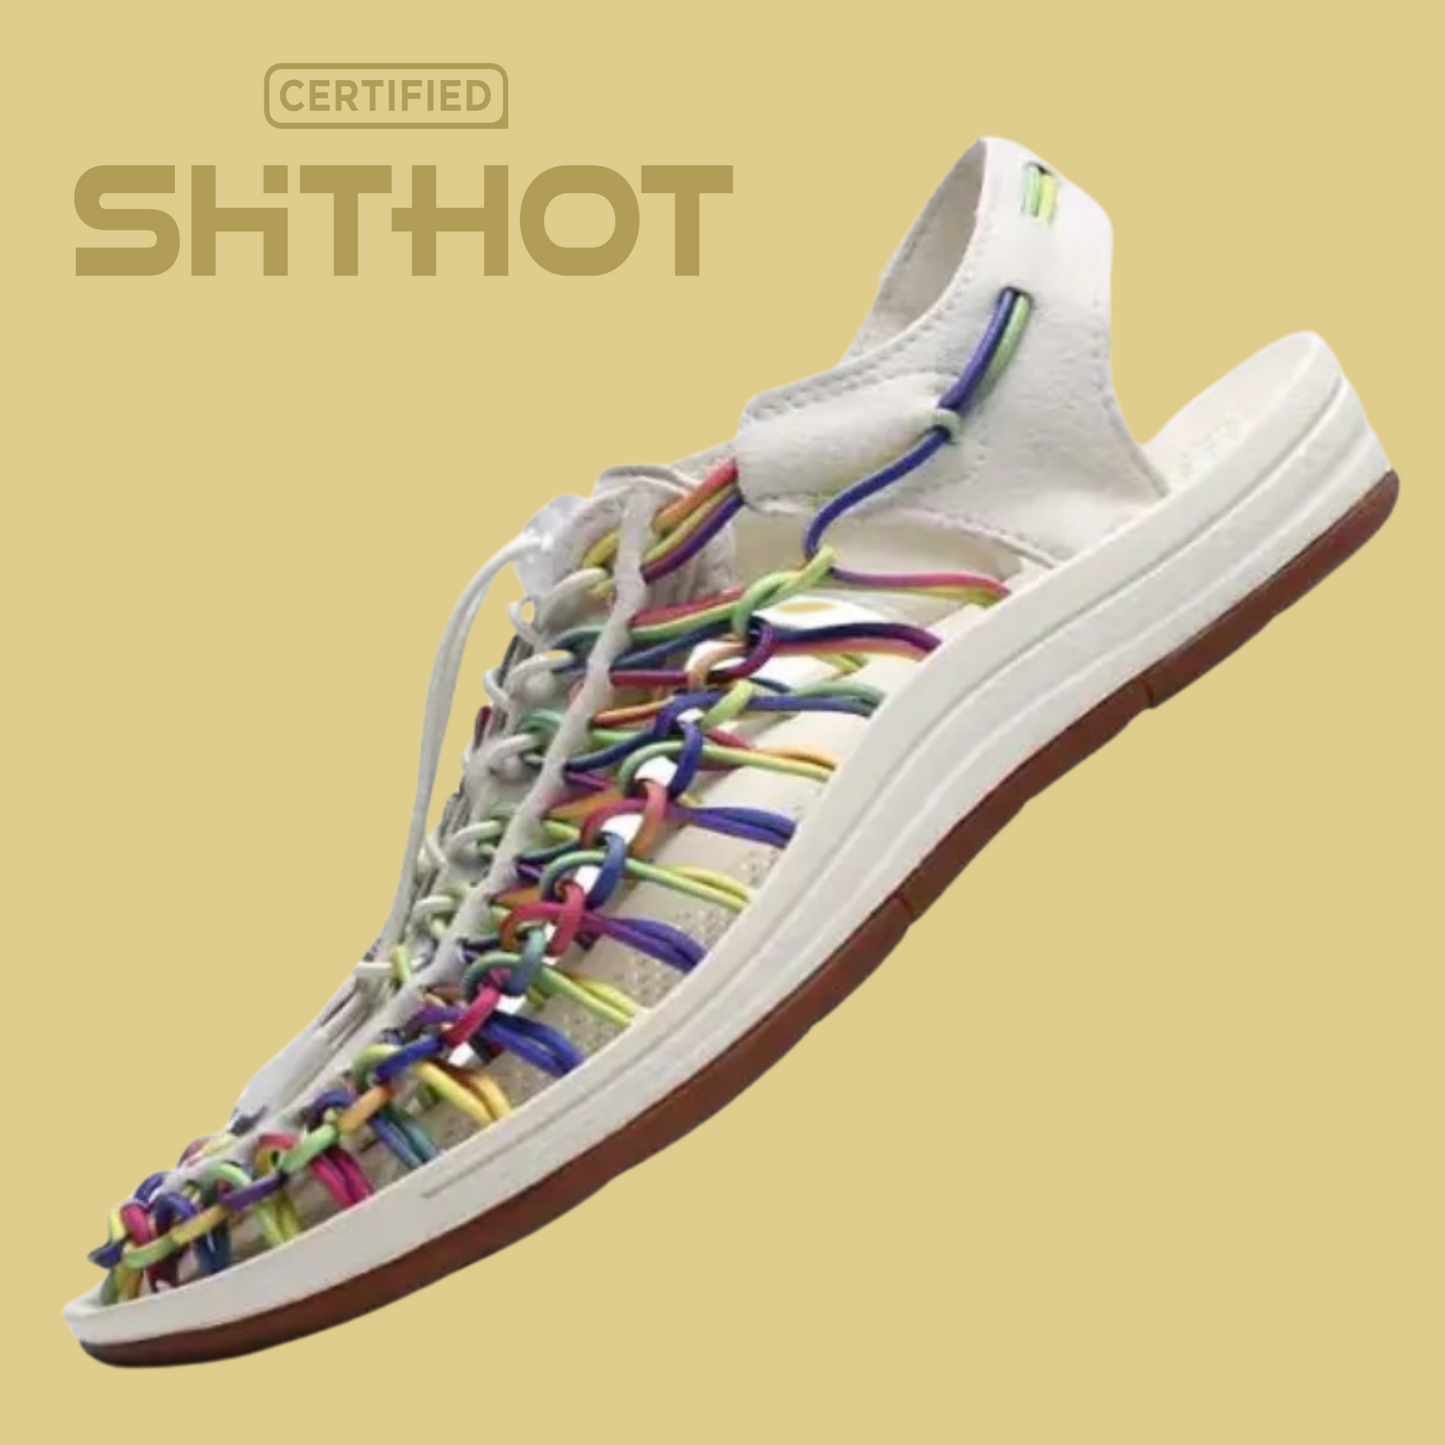 Certified ShitHot Handmade Sandals - Colorful White